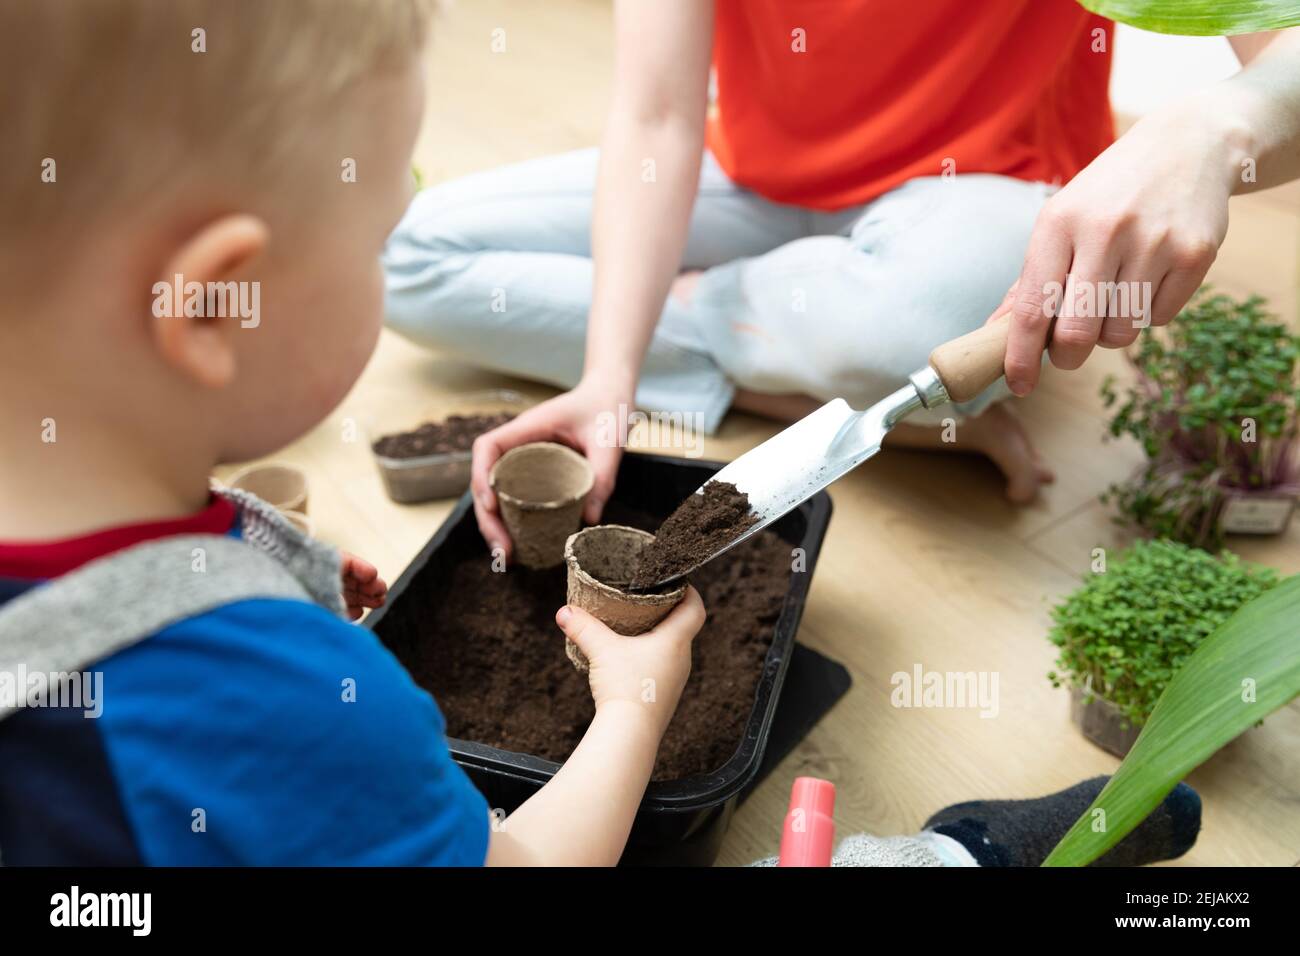 Home hobbies planting seeds. Young mother and son preparing soil by pooring dirt in to small pots. Spring time activities. Stock Photo